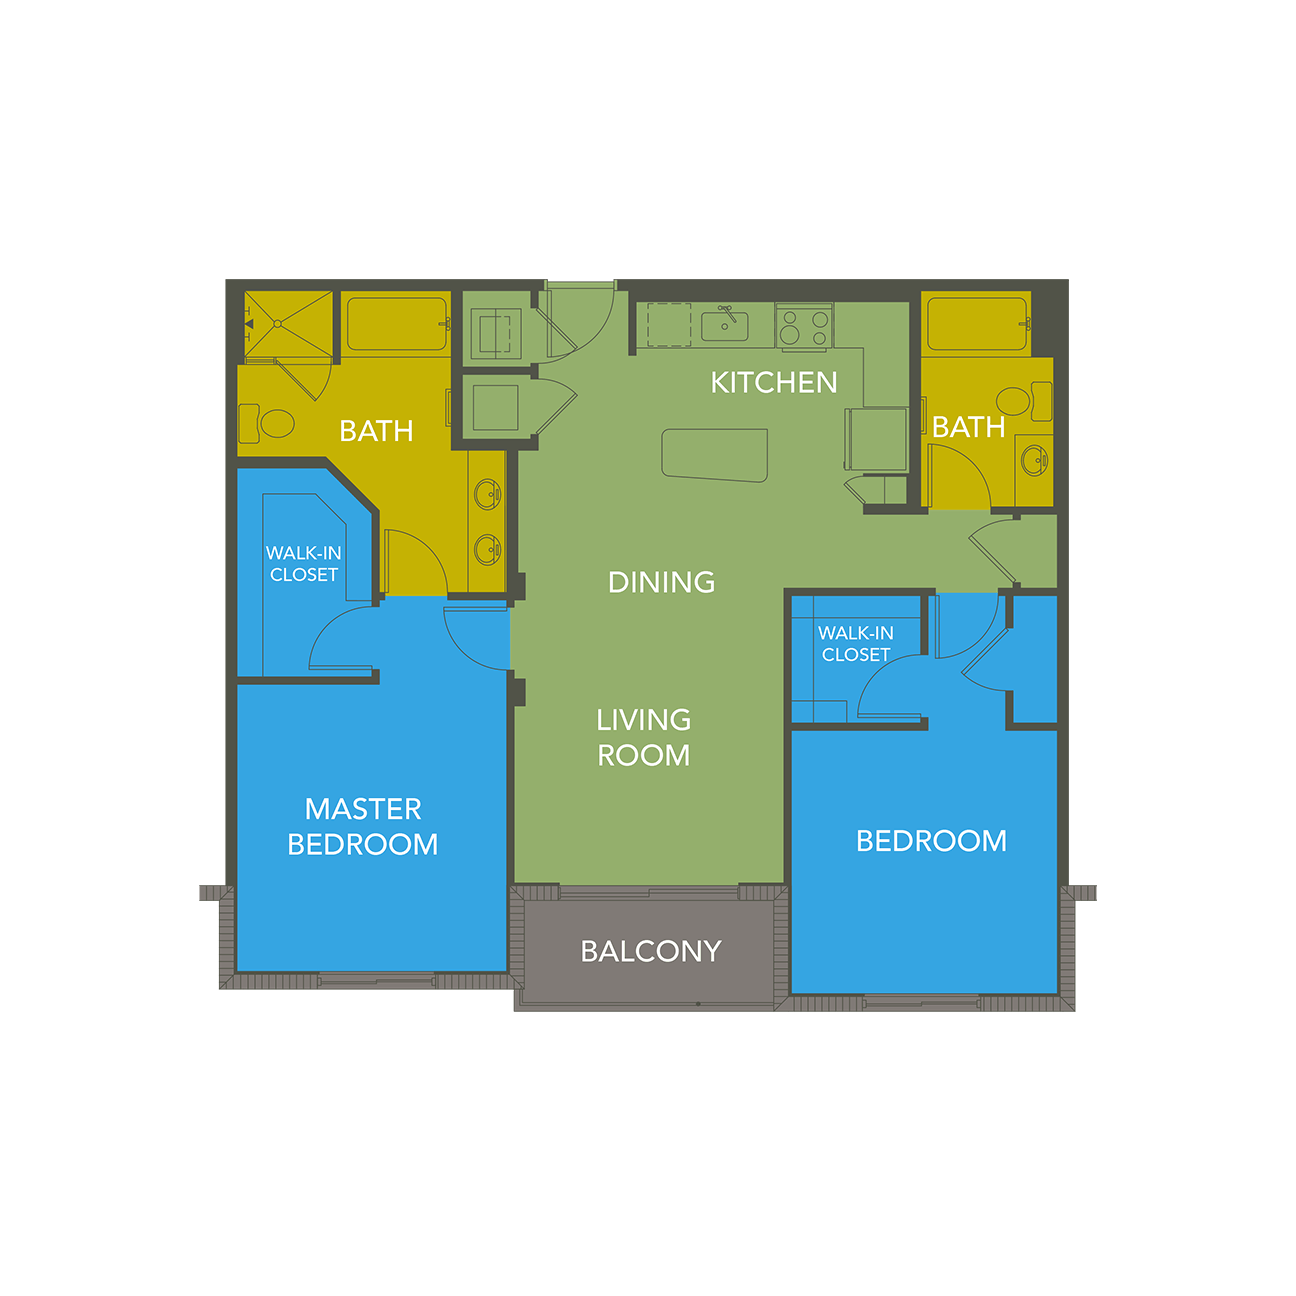 Luxury apartment homes in south miami downtown dadeland; one, two, three bedroom apartments